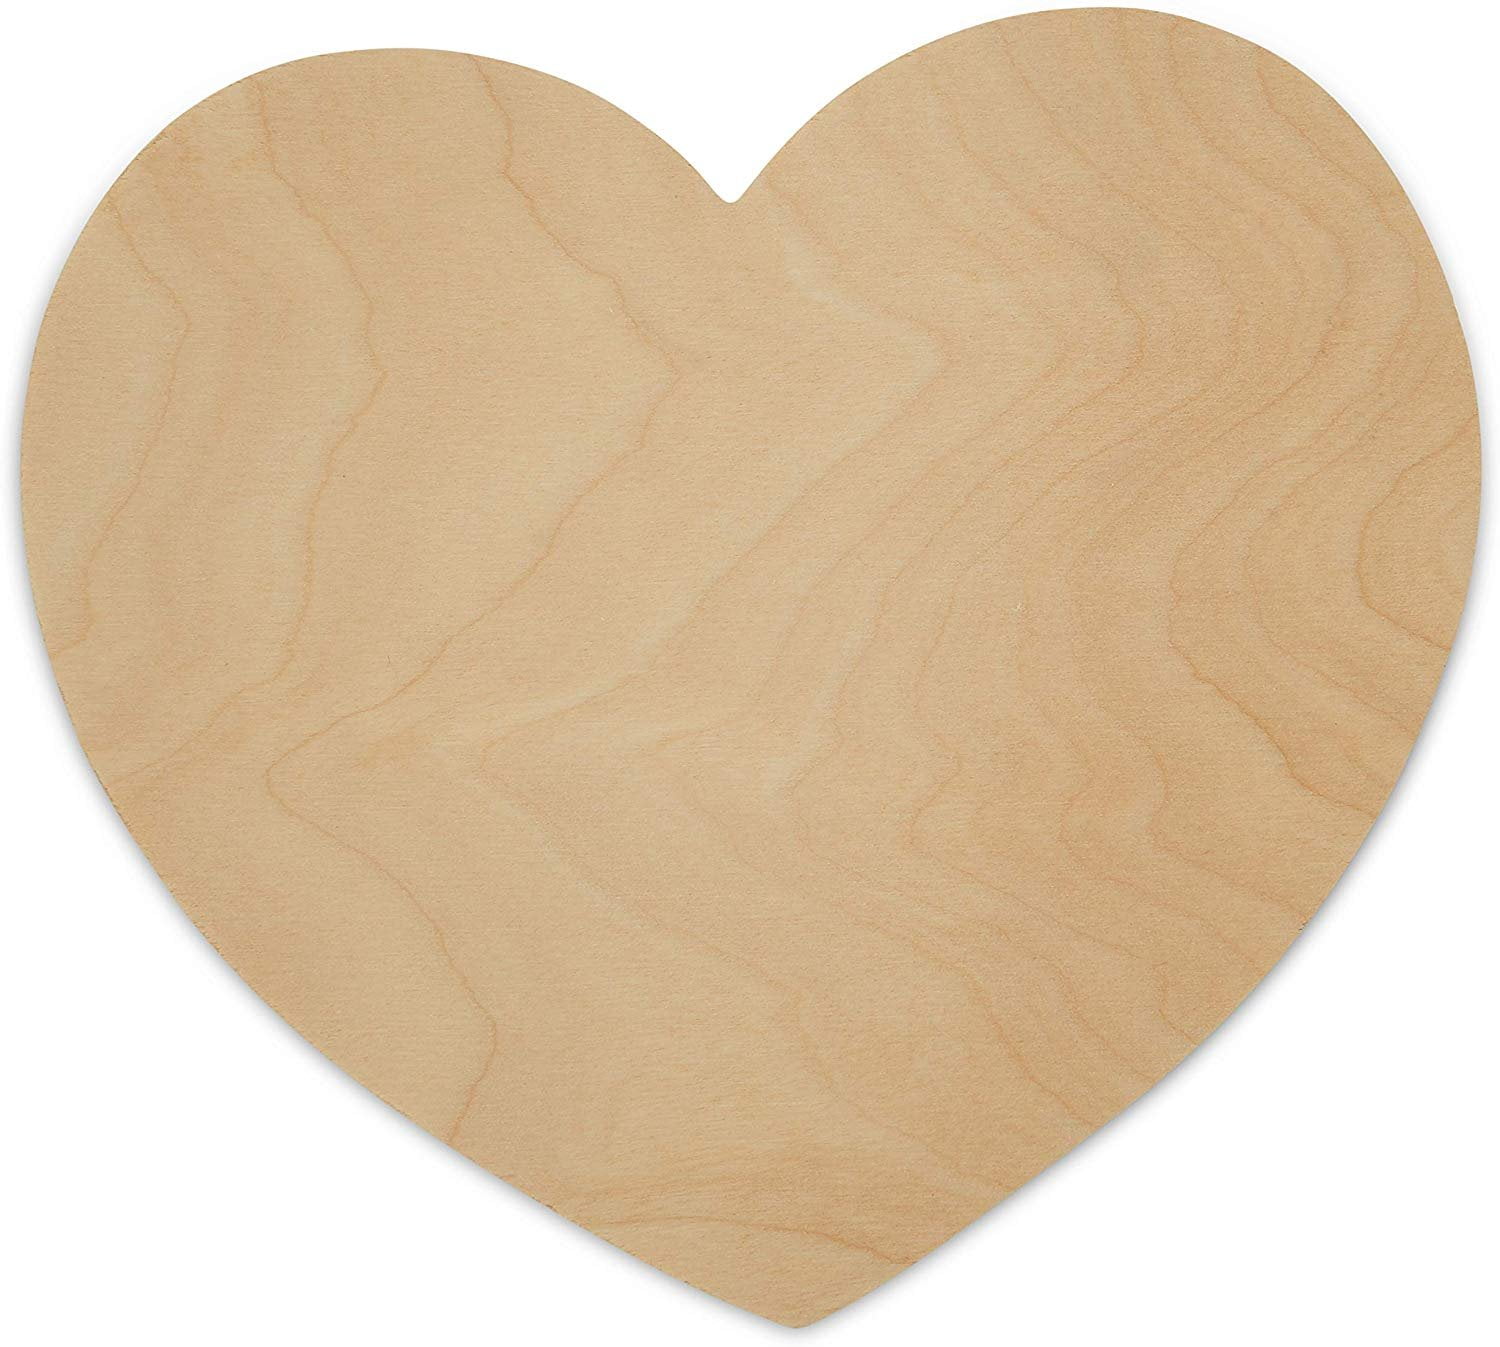 4 inch Wood Hearts Unfinished Wooden Heart Cutout Shape Wood Heart 1/8 inch Thick ，10 Pieces 